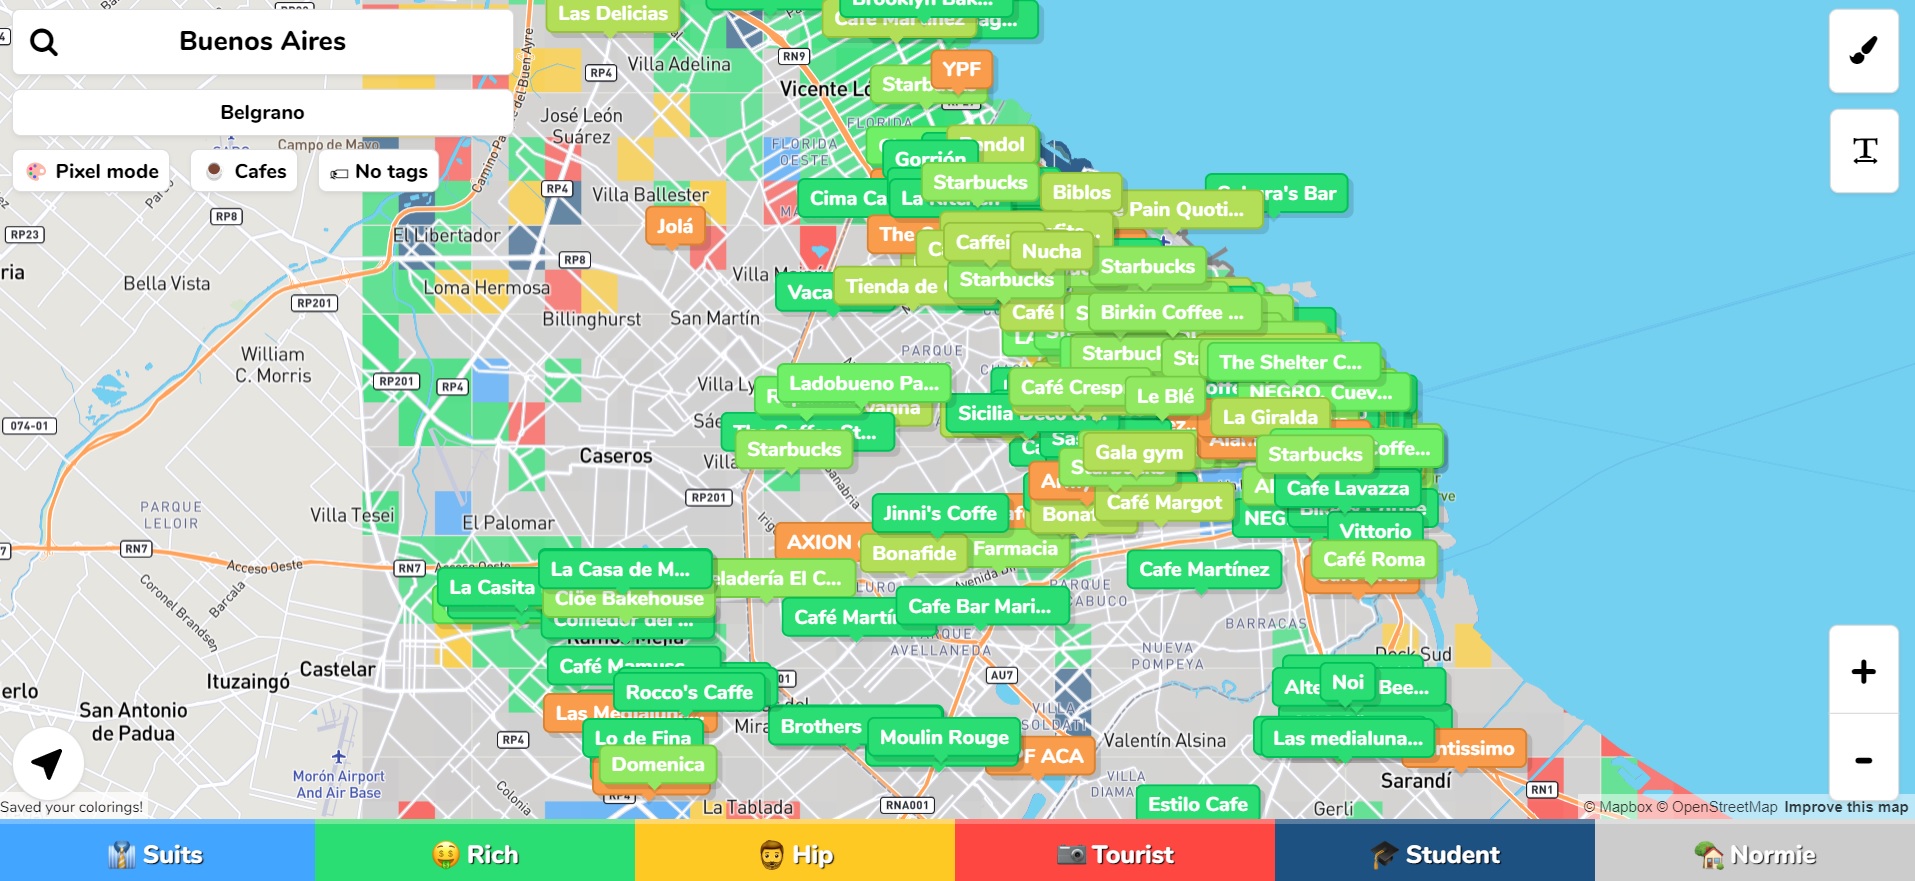 How safe or wealthy is your neighborhood? Look what it says in Hoodmaps, the map that shows you and describes it with labels